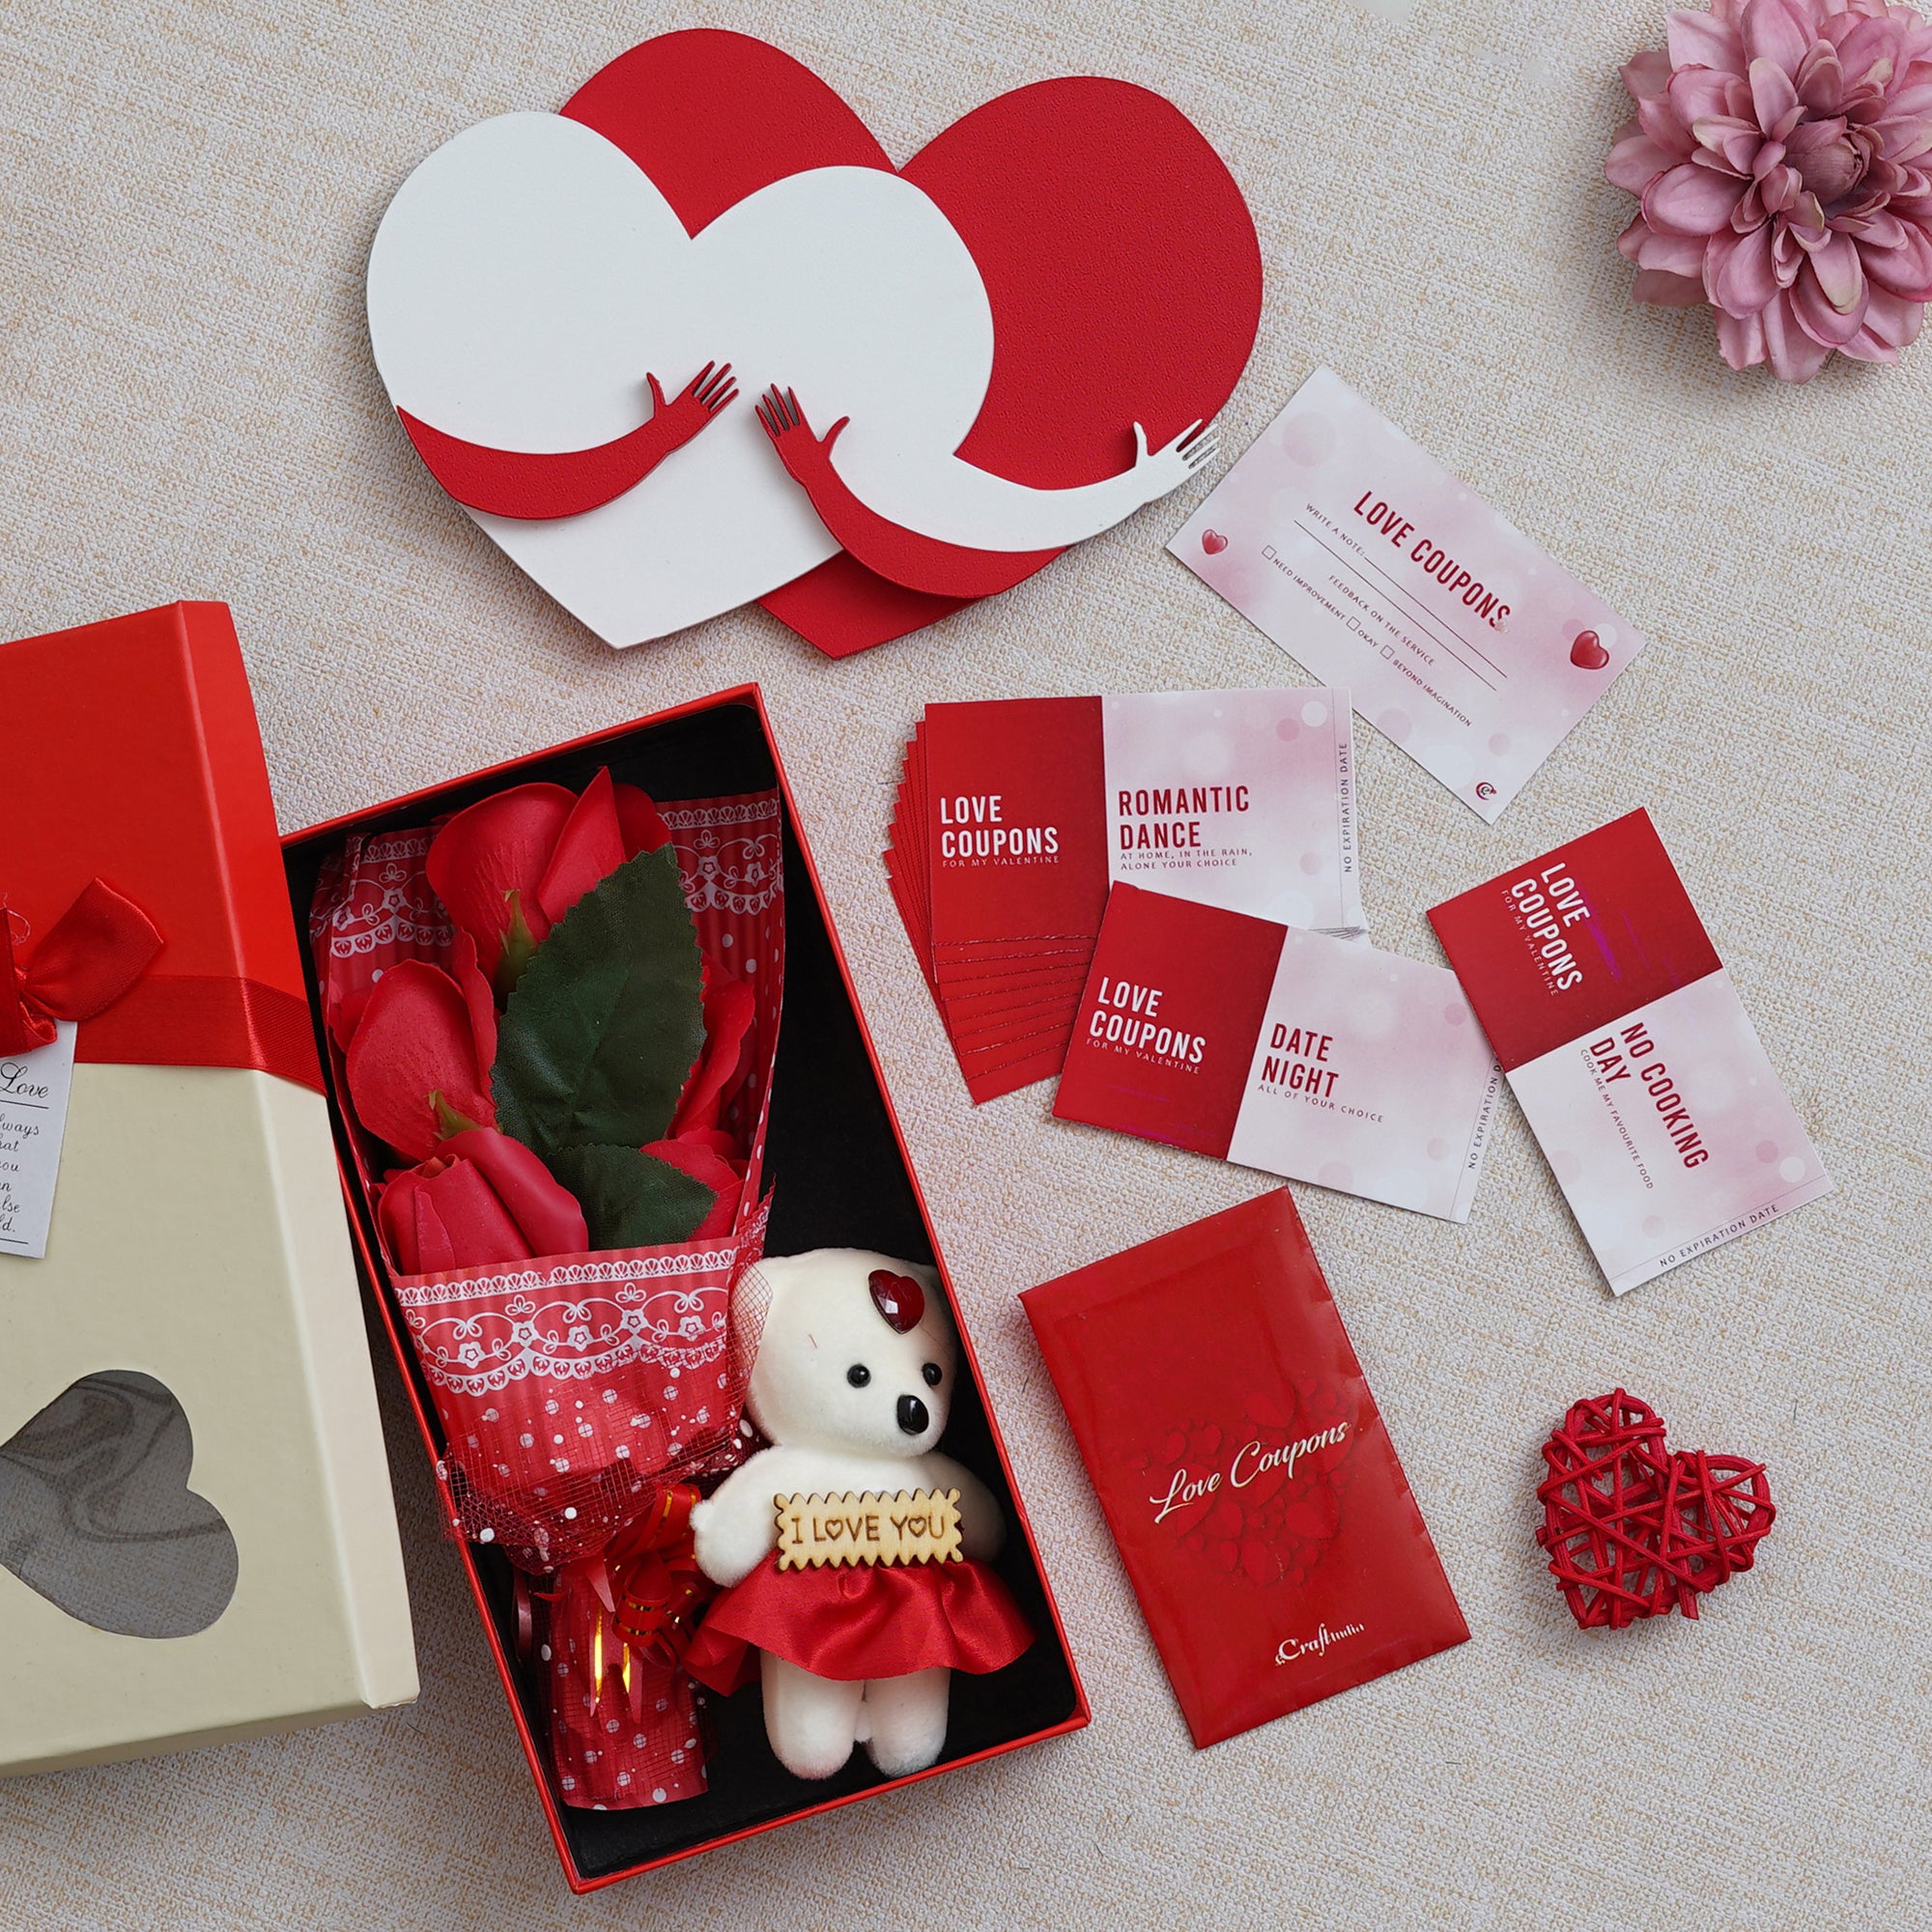 Valentine Combo of Pack of 12 Love Coupons Gift Cards Set, Red and White Heart Hugging Each Other Gift Set, Red Roses Bouquet and White, Red Teddy Bear Valentine's Rectangle Shaped Gift Box